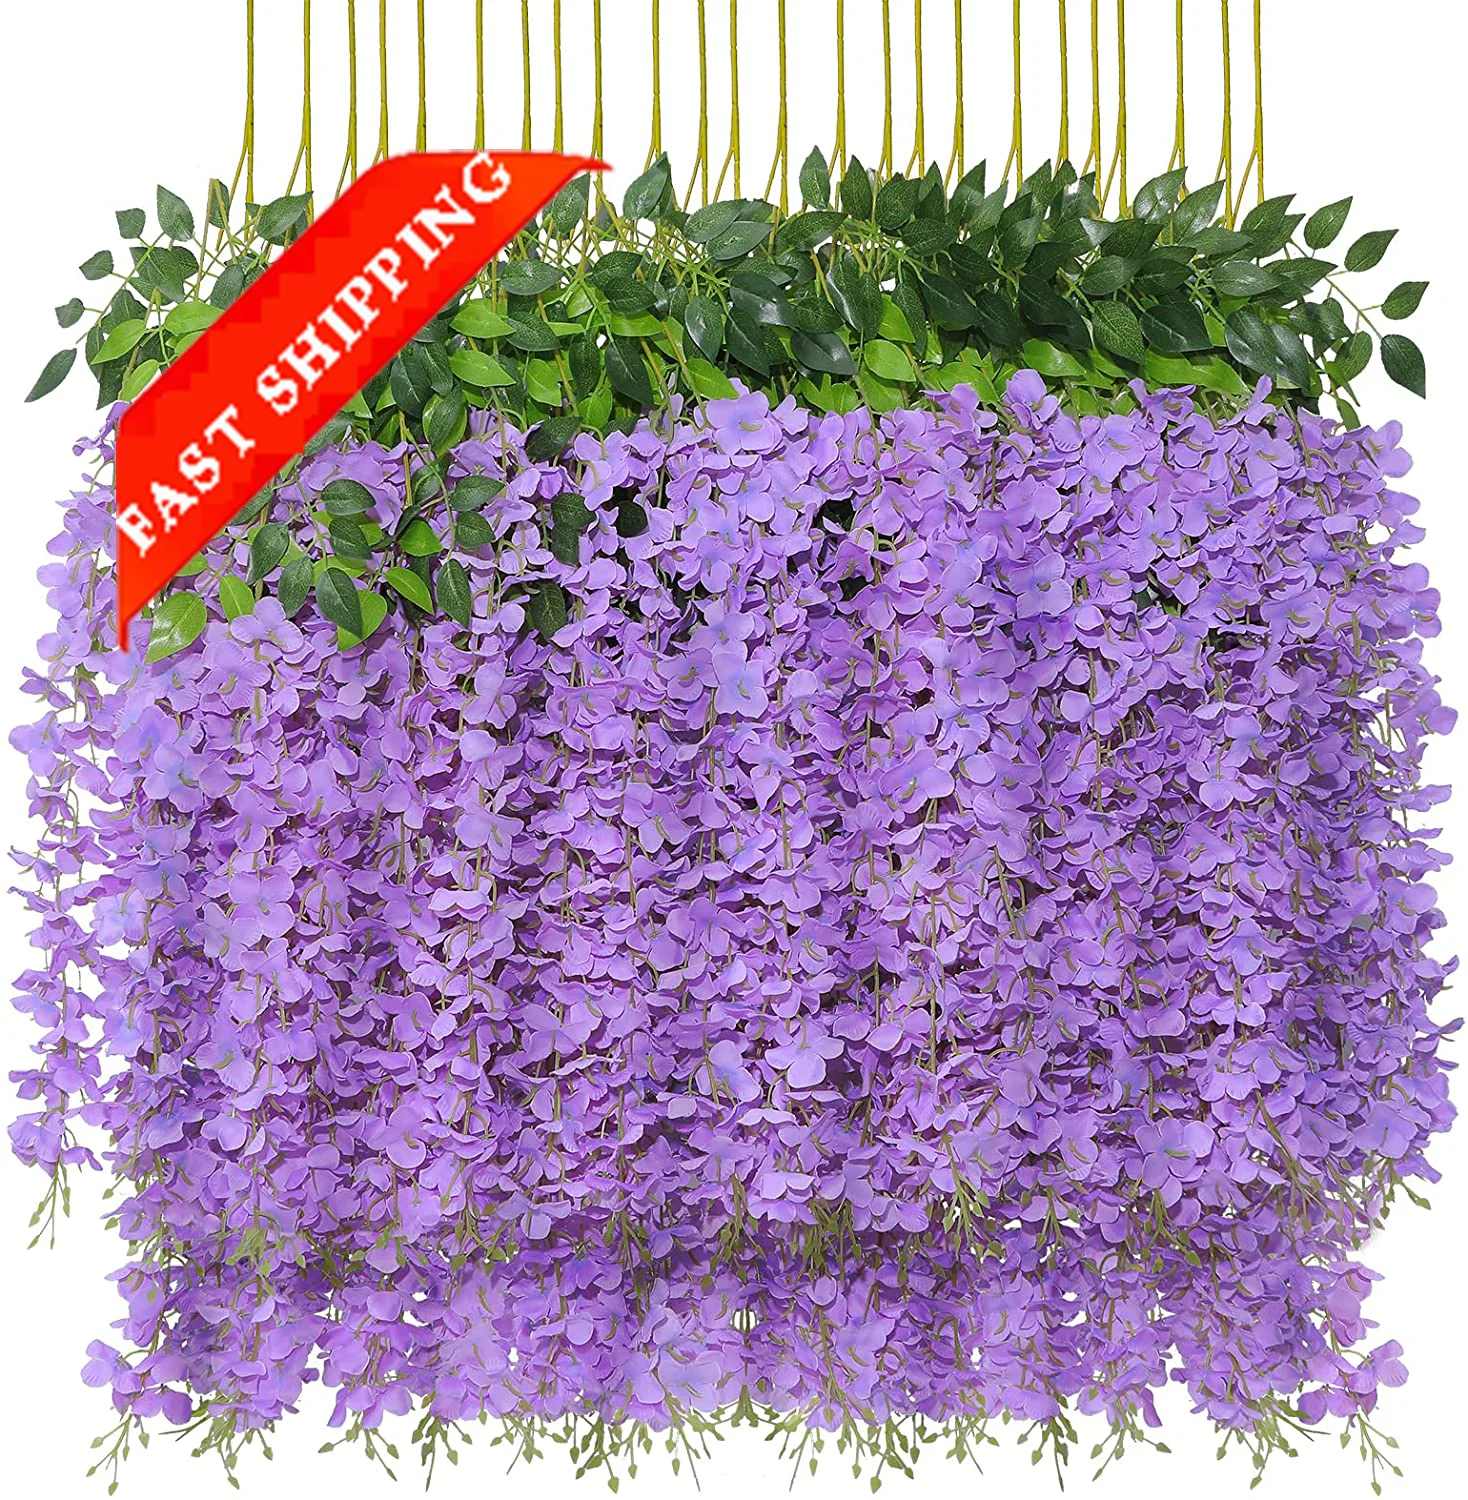 

12 Pack Artificial Faux Wisteria Vine Ratta Hanging Garland Silk Flowers Wisteria for Home Party Wedding Decor